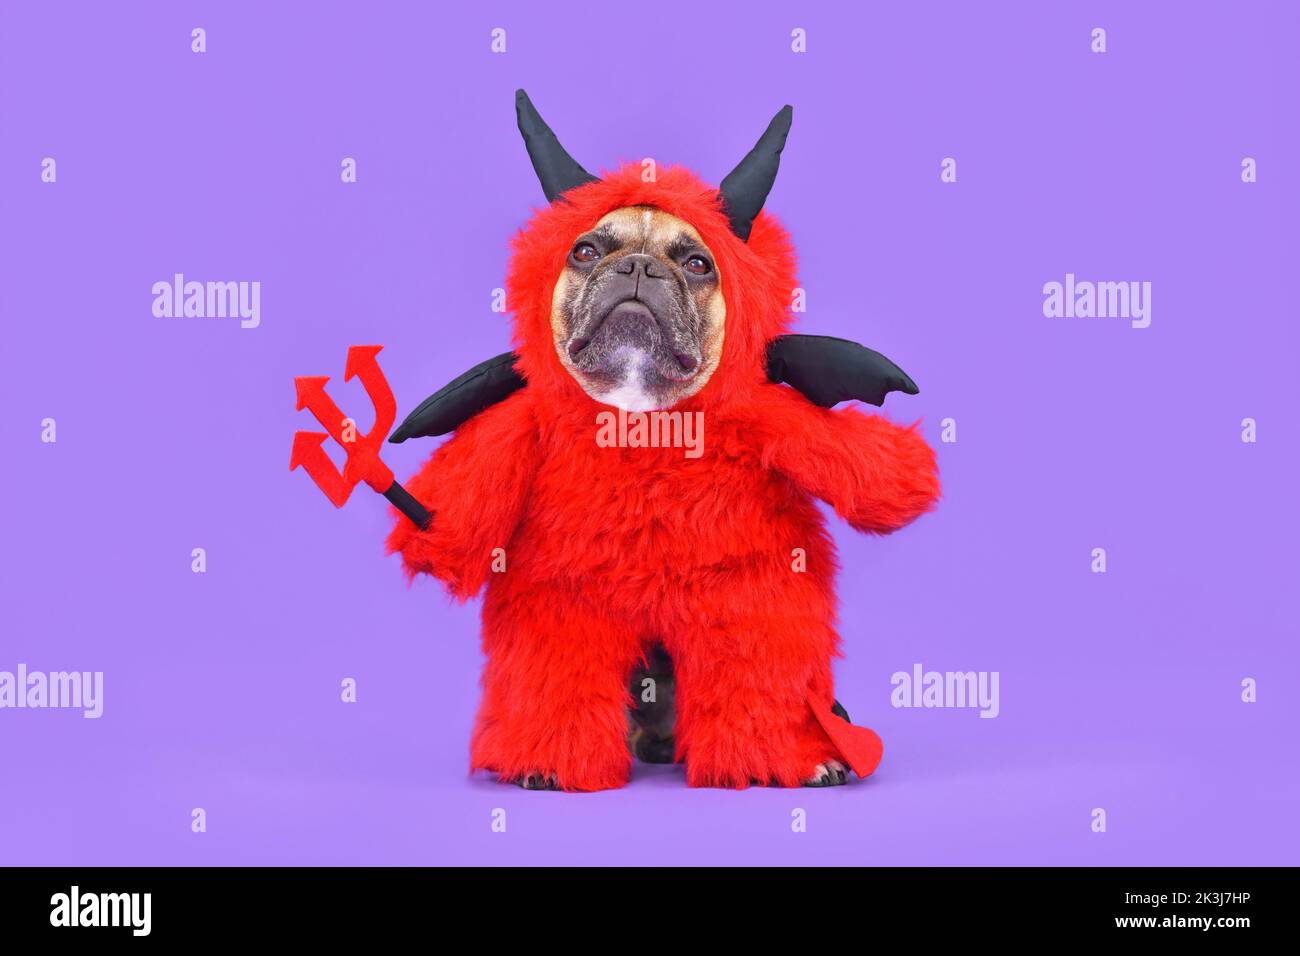 French Bulldog dog with red devil Halloween costume wearing a fluffy full body suit with fake arms holding pitchfork, with devil tail, horns and black Stock Photo